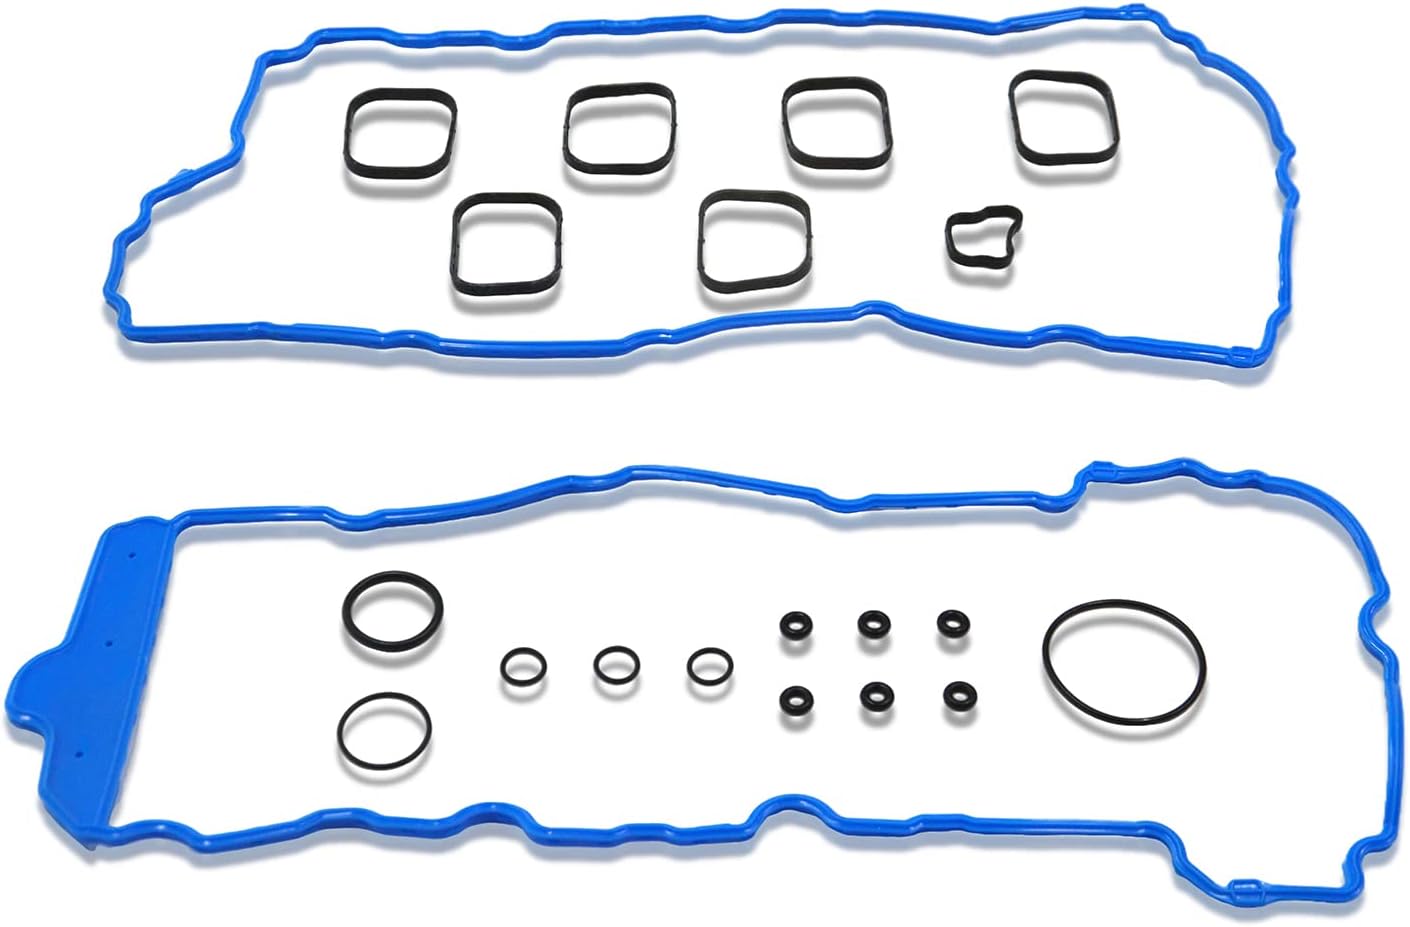 GOCPB Head Gasket Set with Bolts Compatible with 2009 2010 2011 2012 2013 2014 2015 2016 Tranverse Buick Enclave GMC Arcadia 3.6L MA-9761294990 Head Gasket Bolts Set (with Bolts)